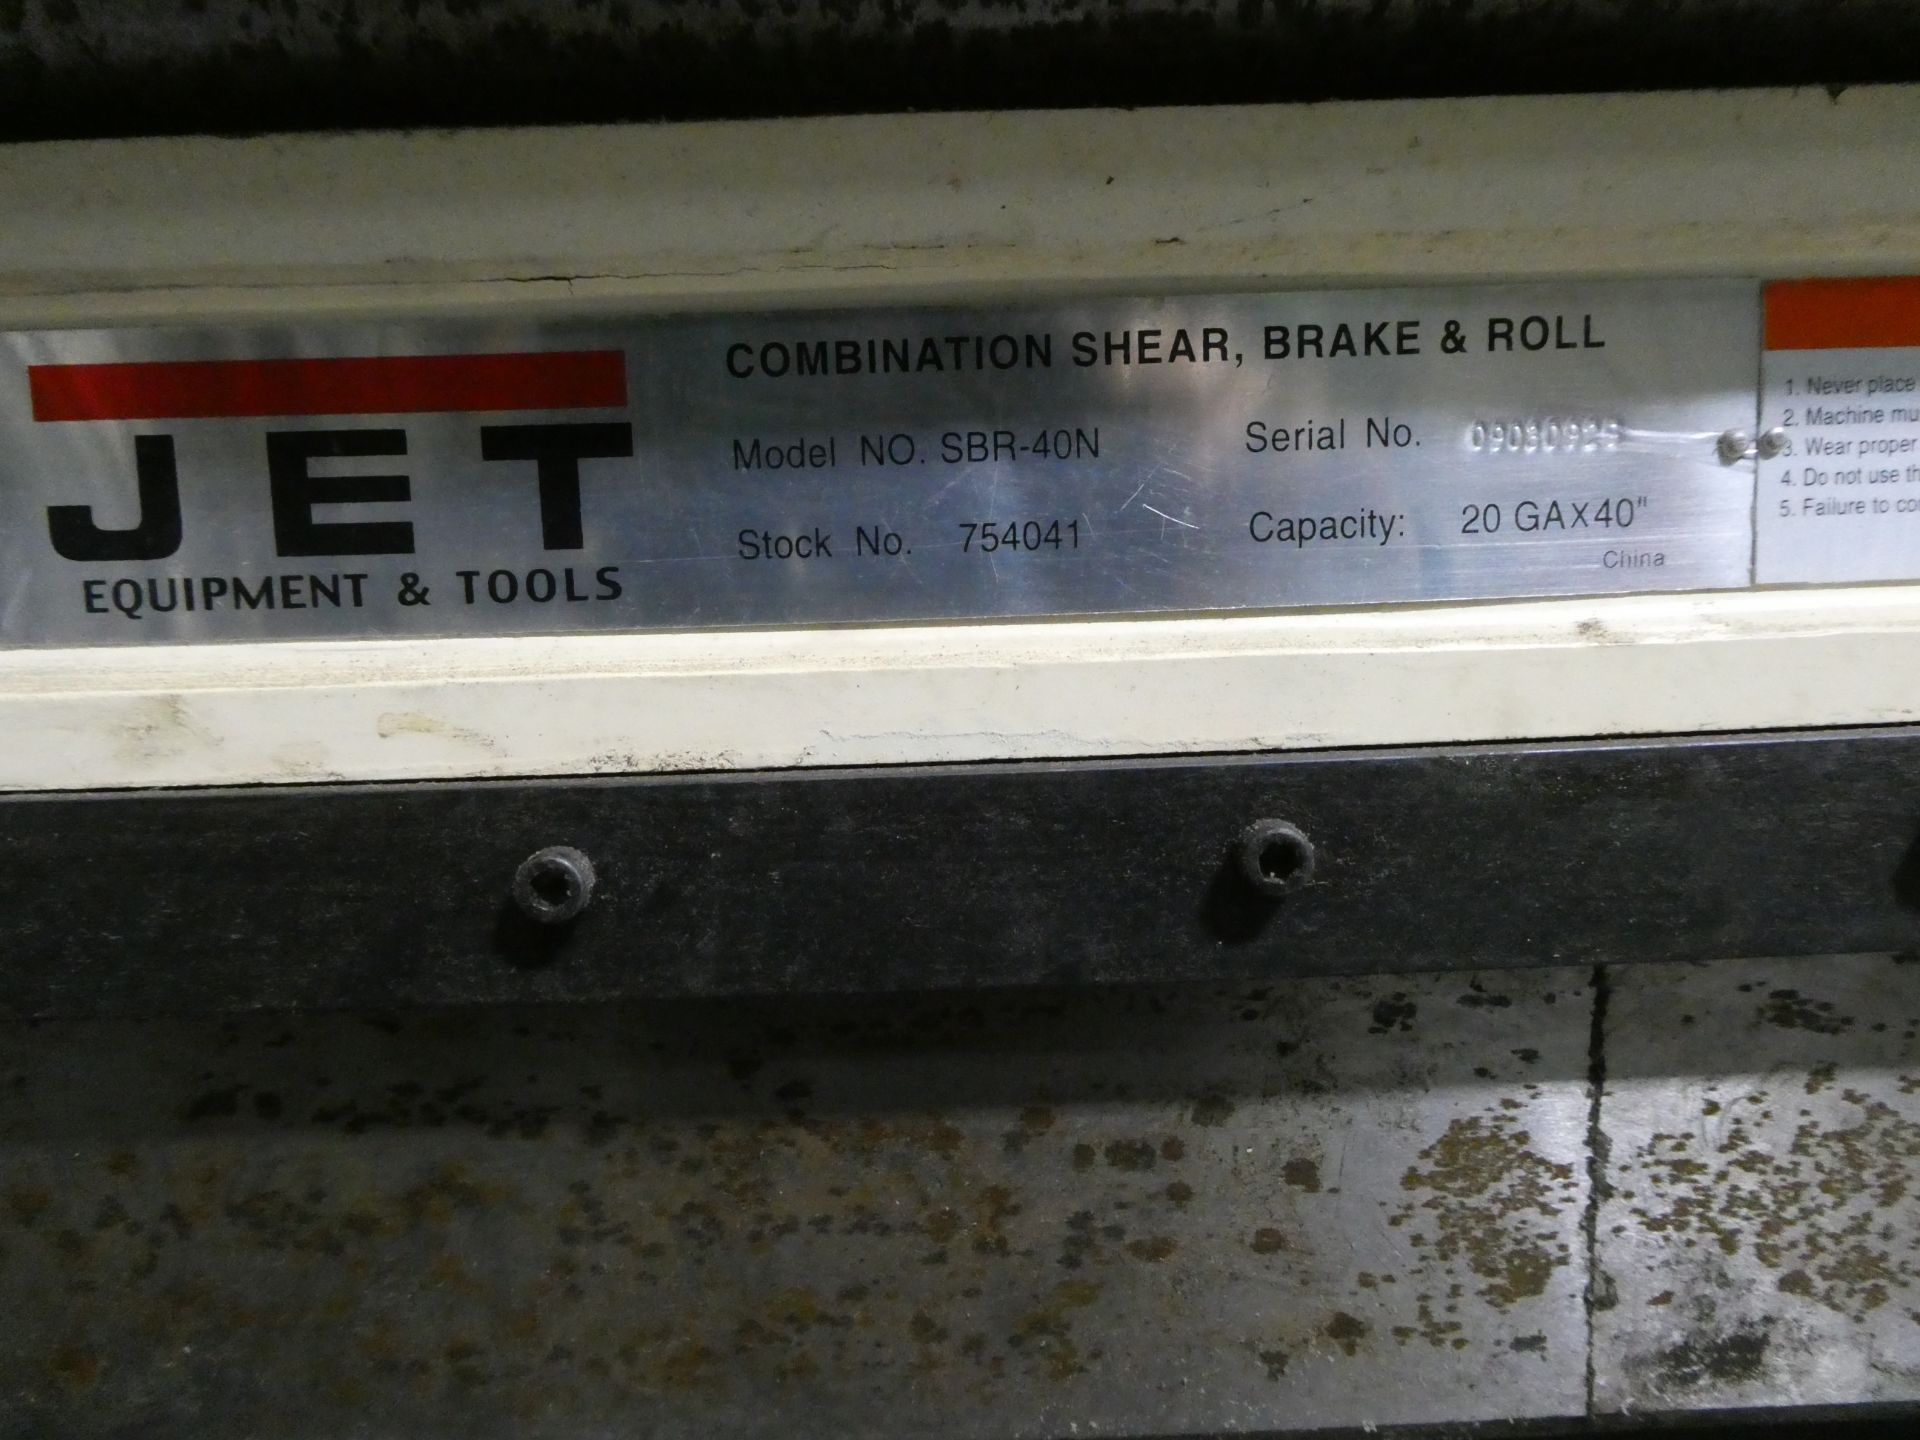 Jet Combination Shear, brake and roll - Image 2 of 3